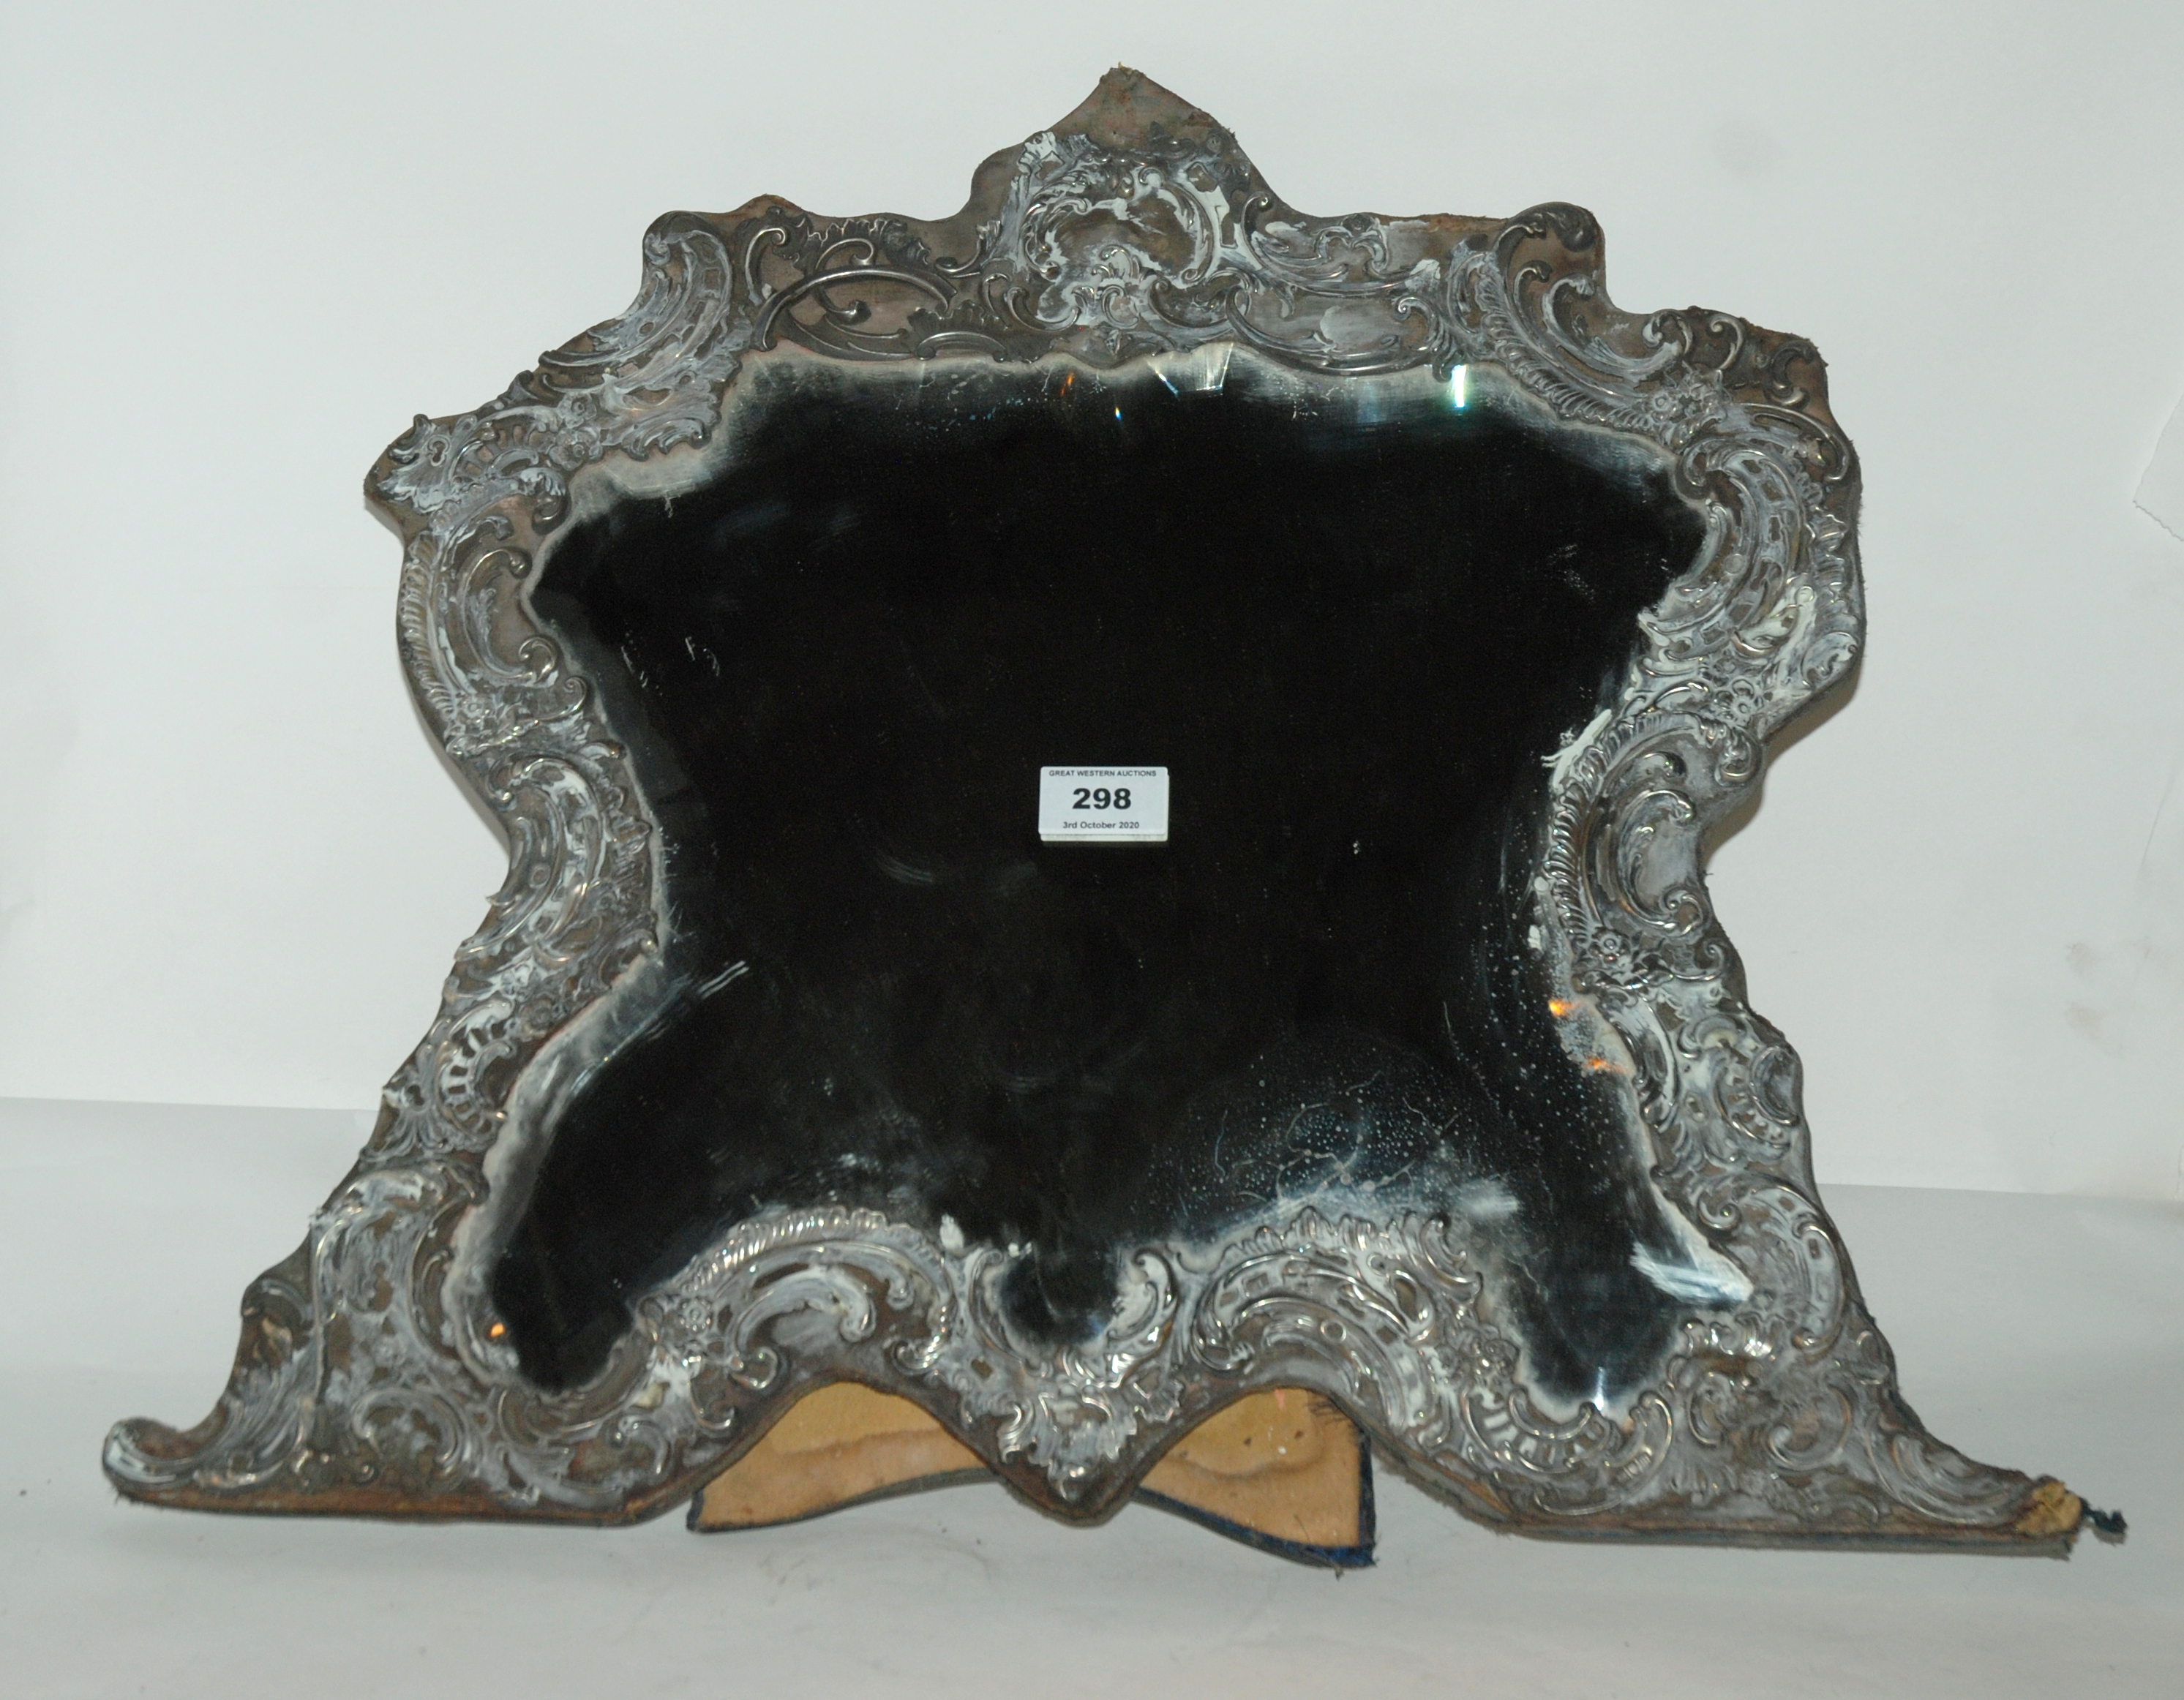 An Edwardian silver mounted easel mirror, London 1907 (very dirty with some losses), 47cm x 55cm - Image 2 of 2